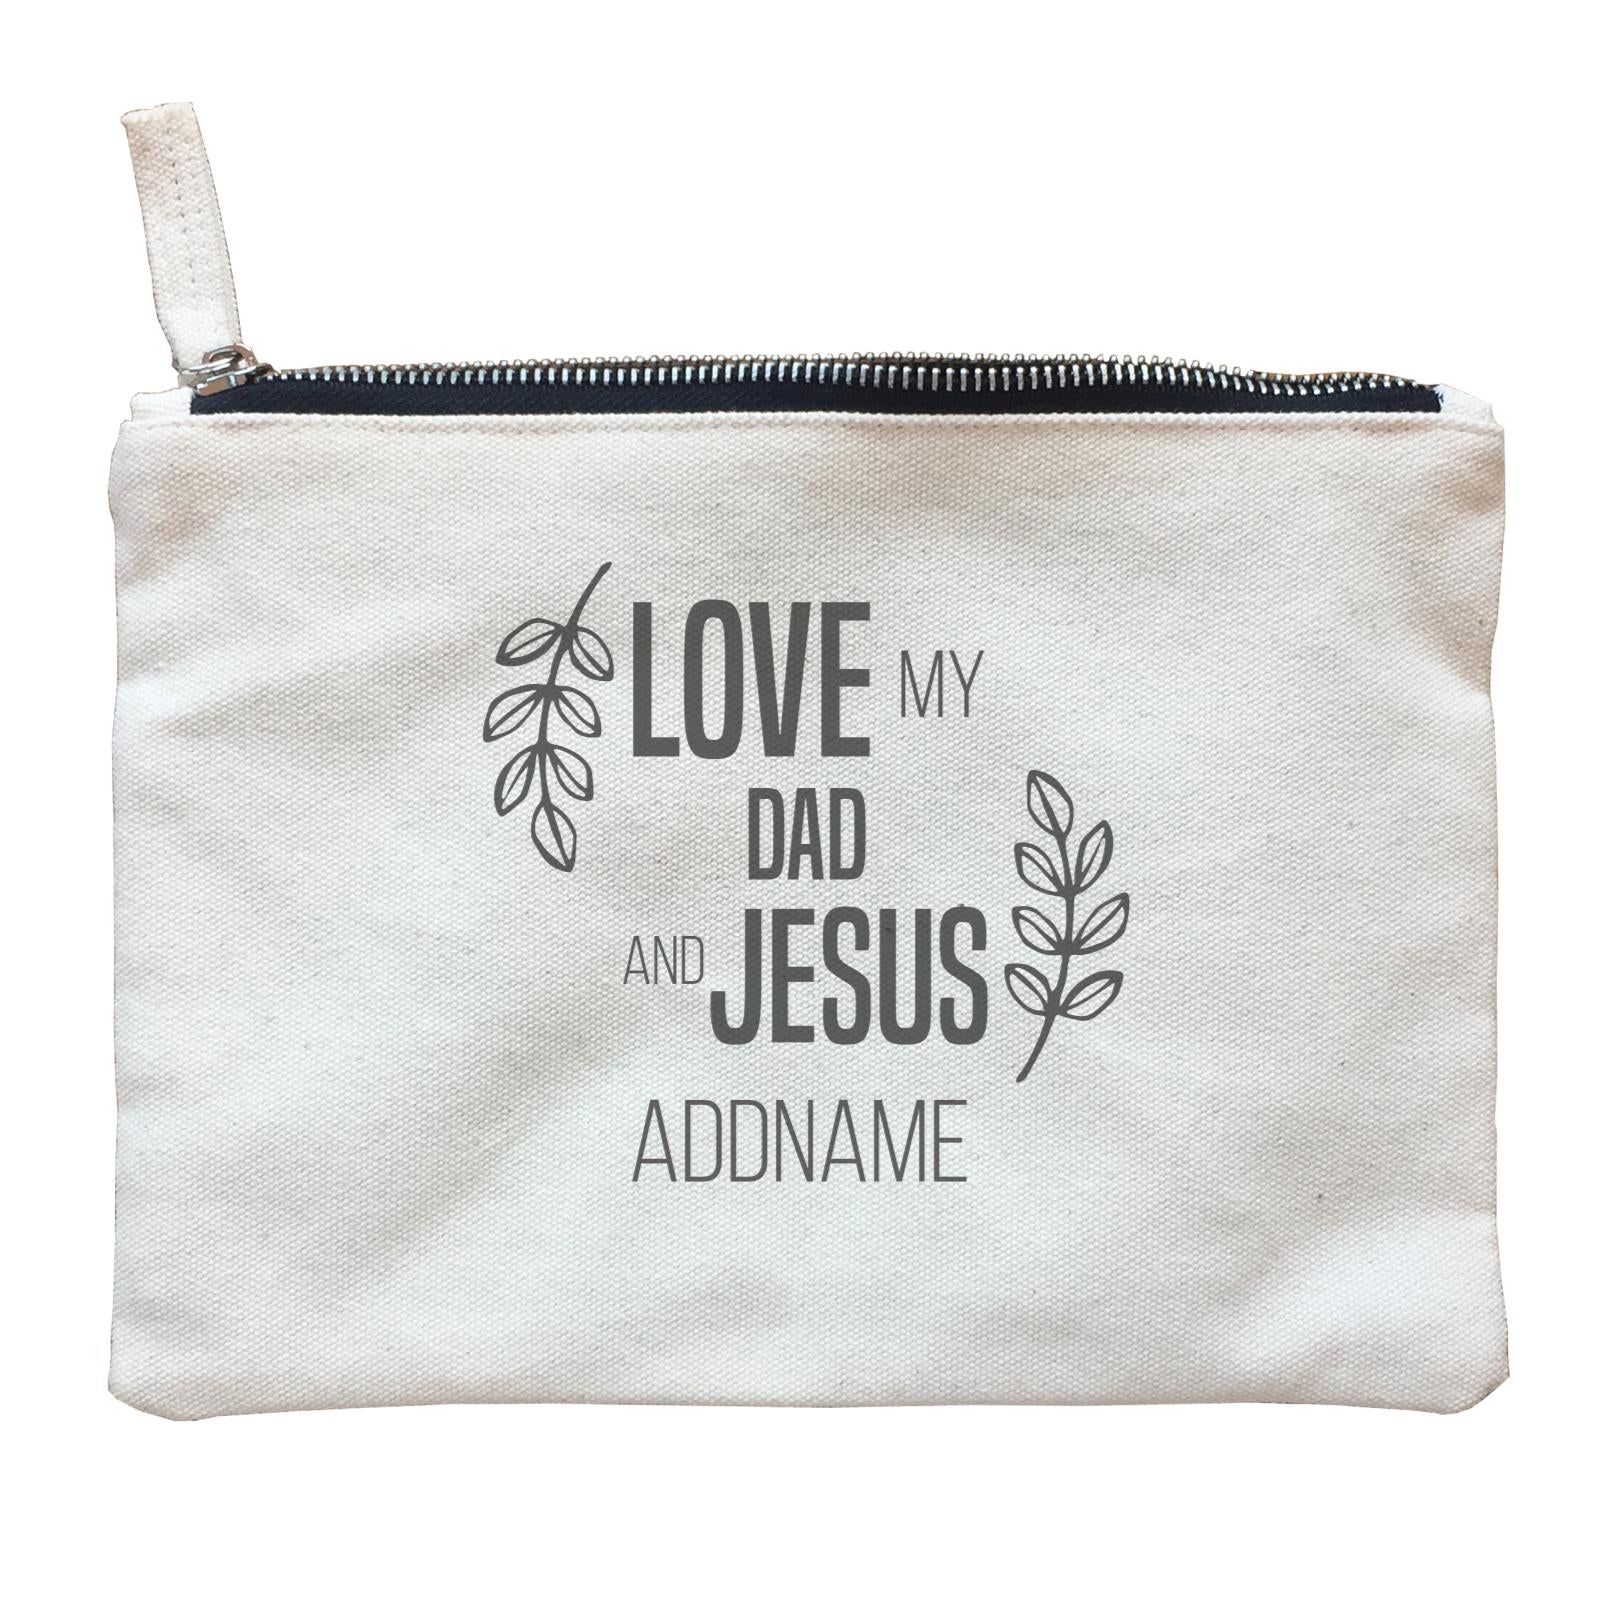 Christian Series Love My Dad And Jesus Addname Zipper Pouch